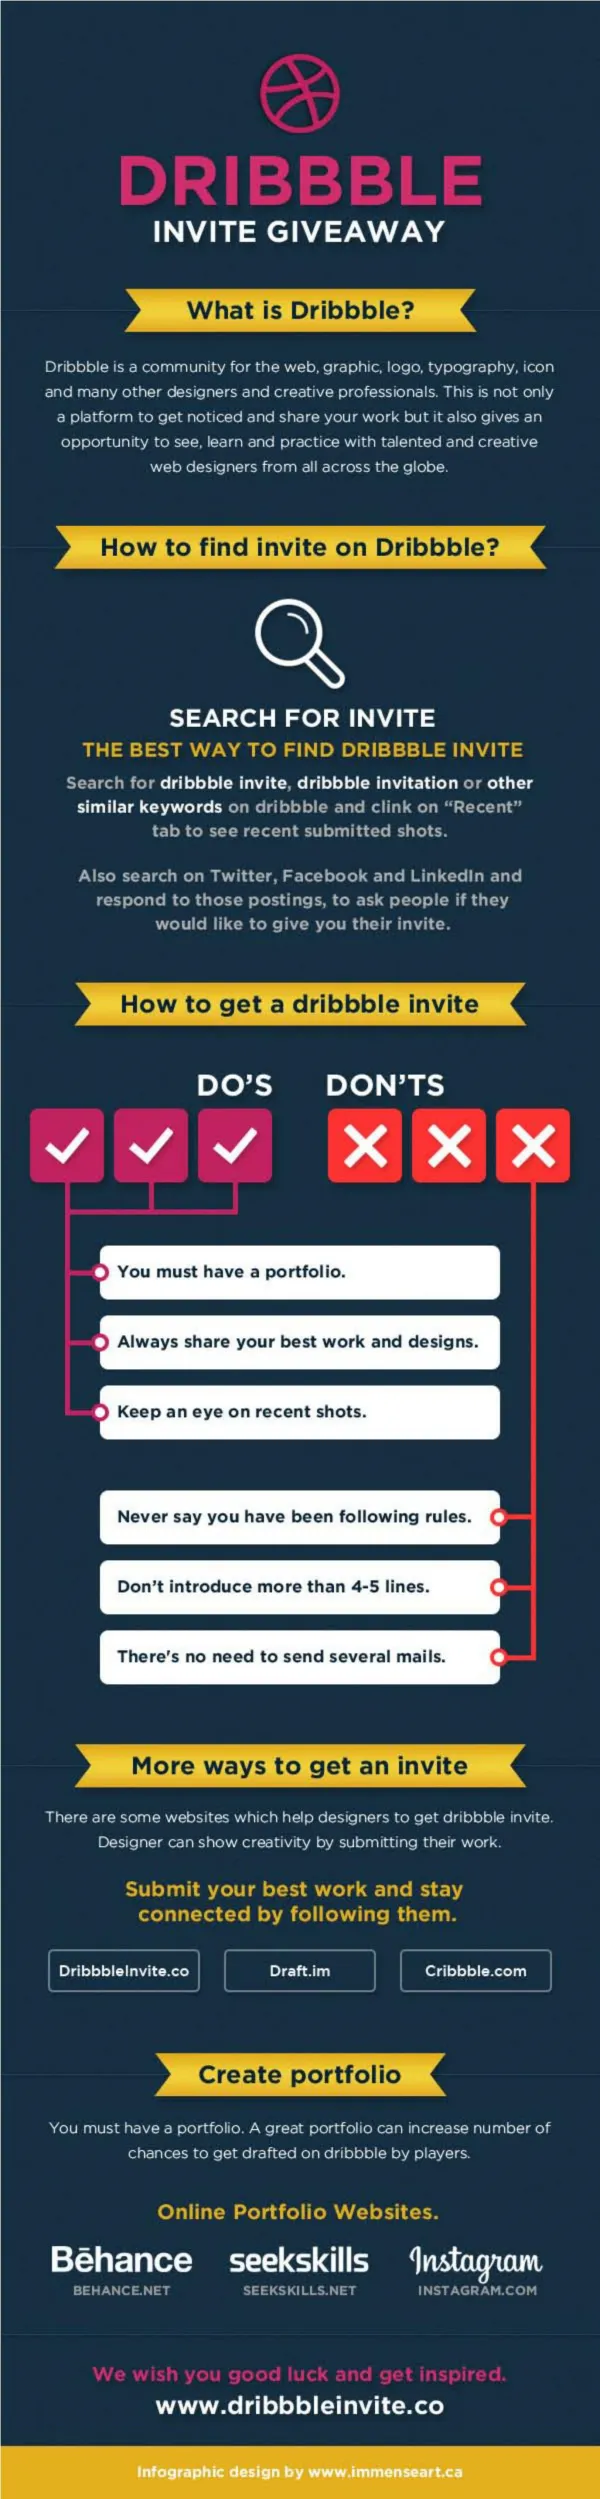 How to Get a Dribbble Invite